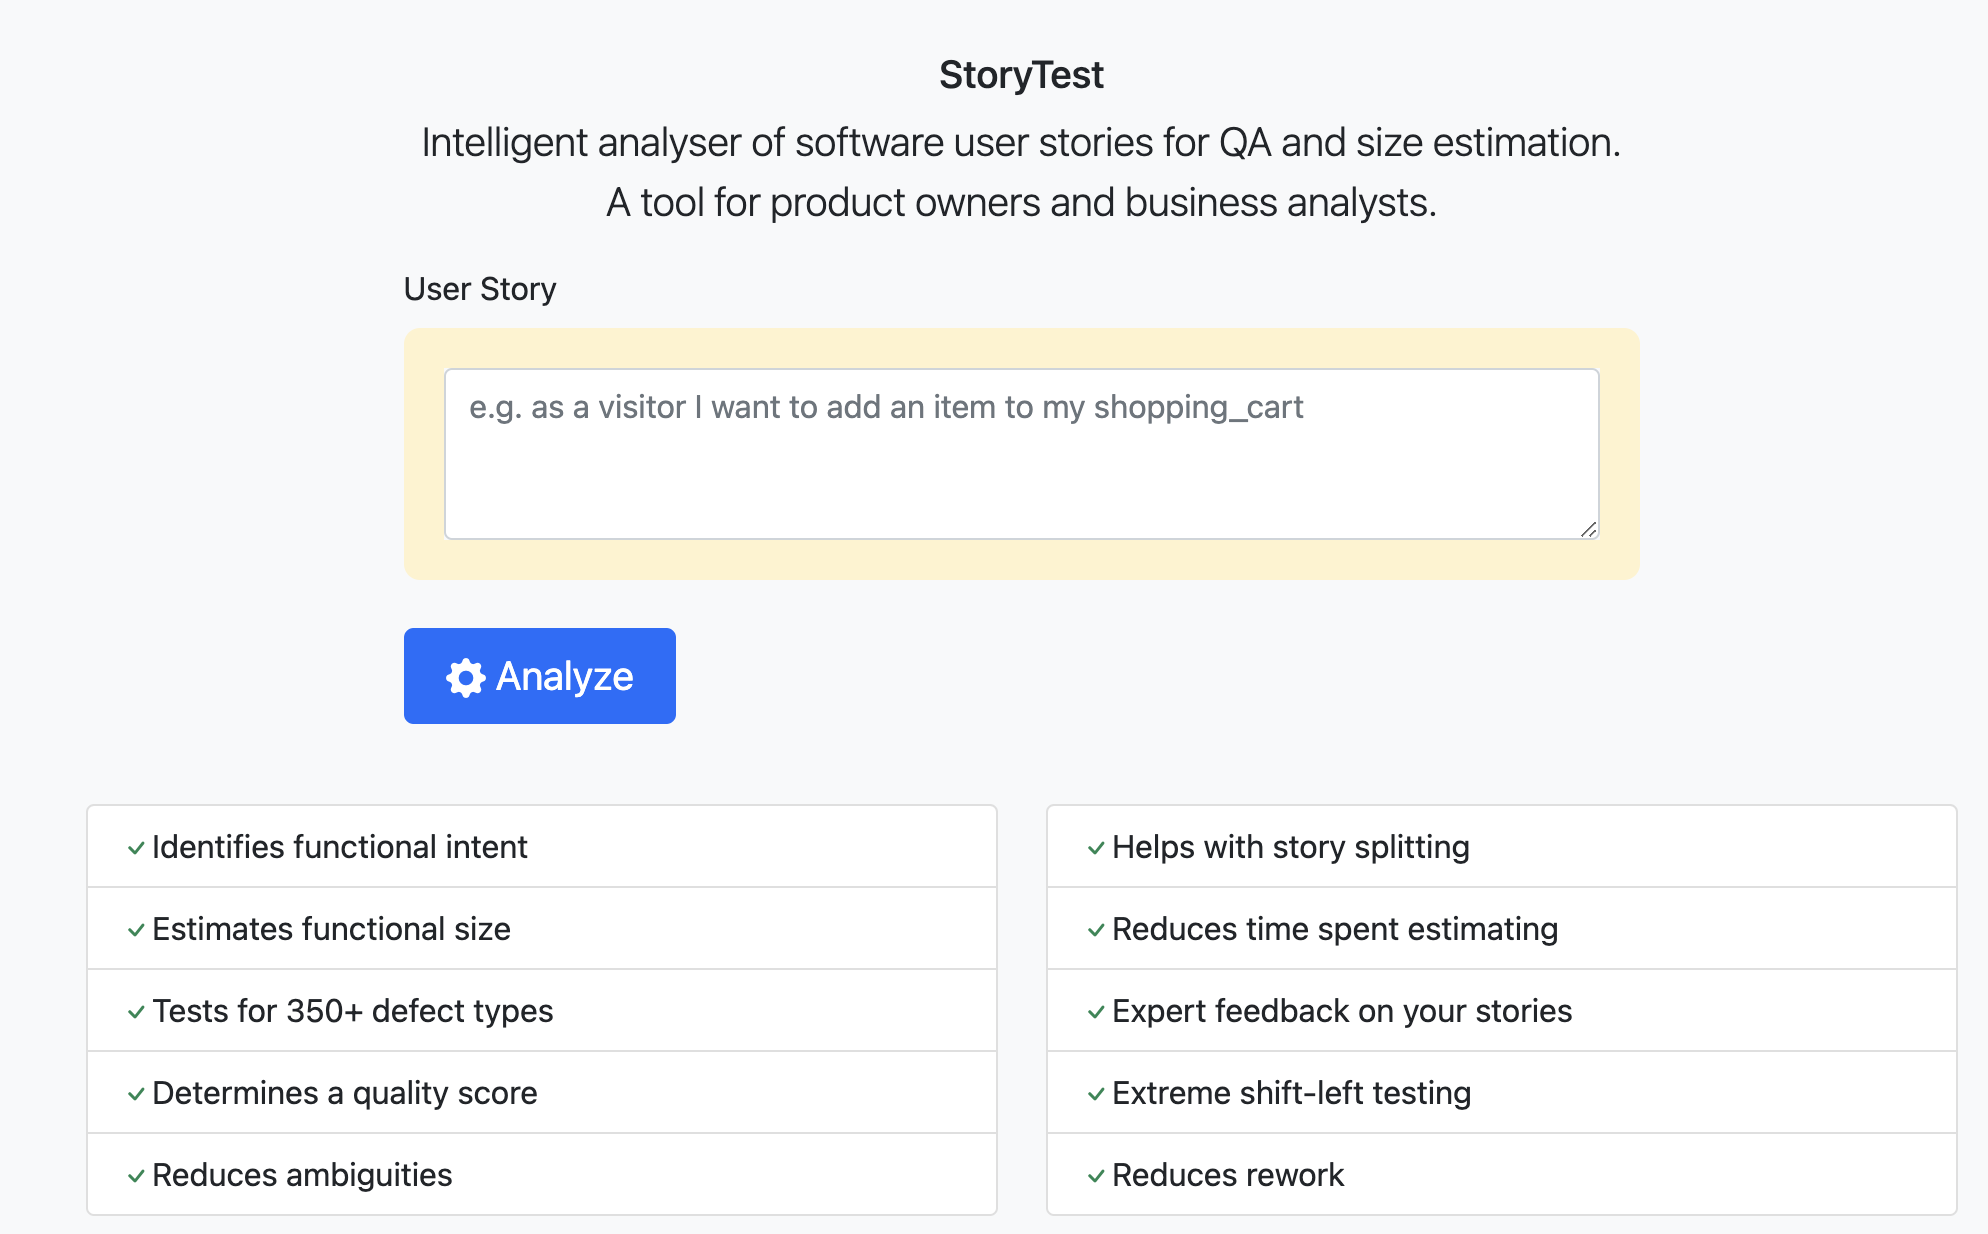 User story testing with Storytest